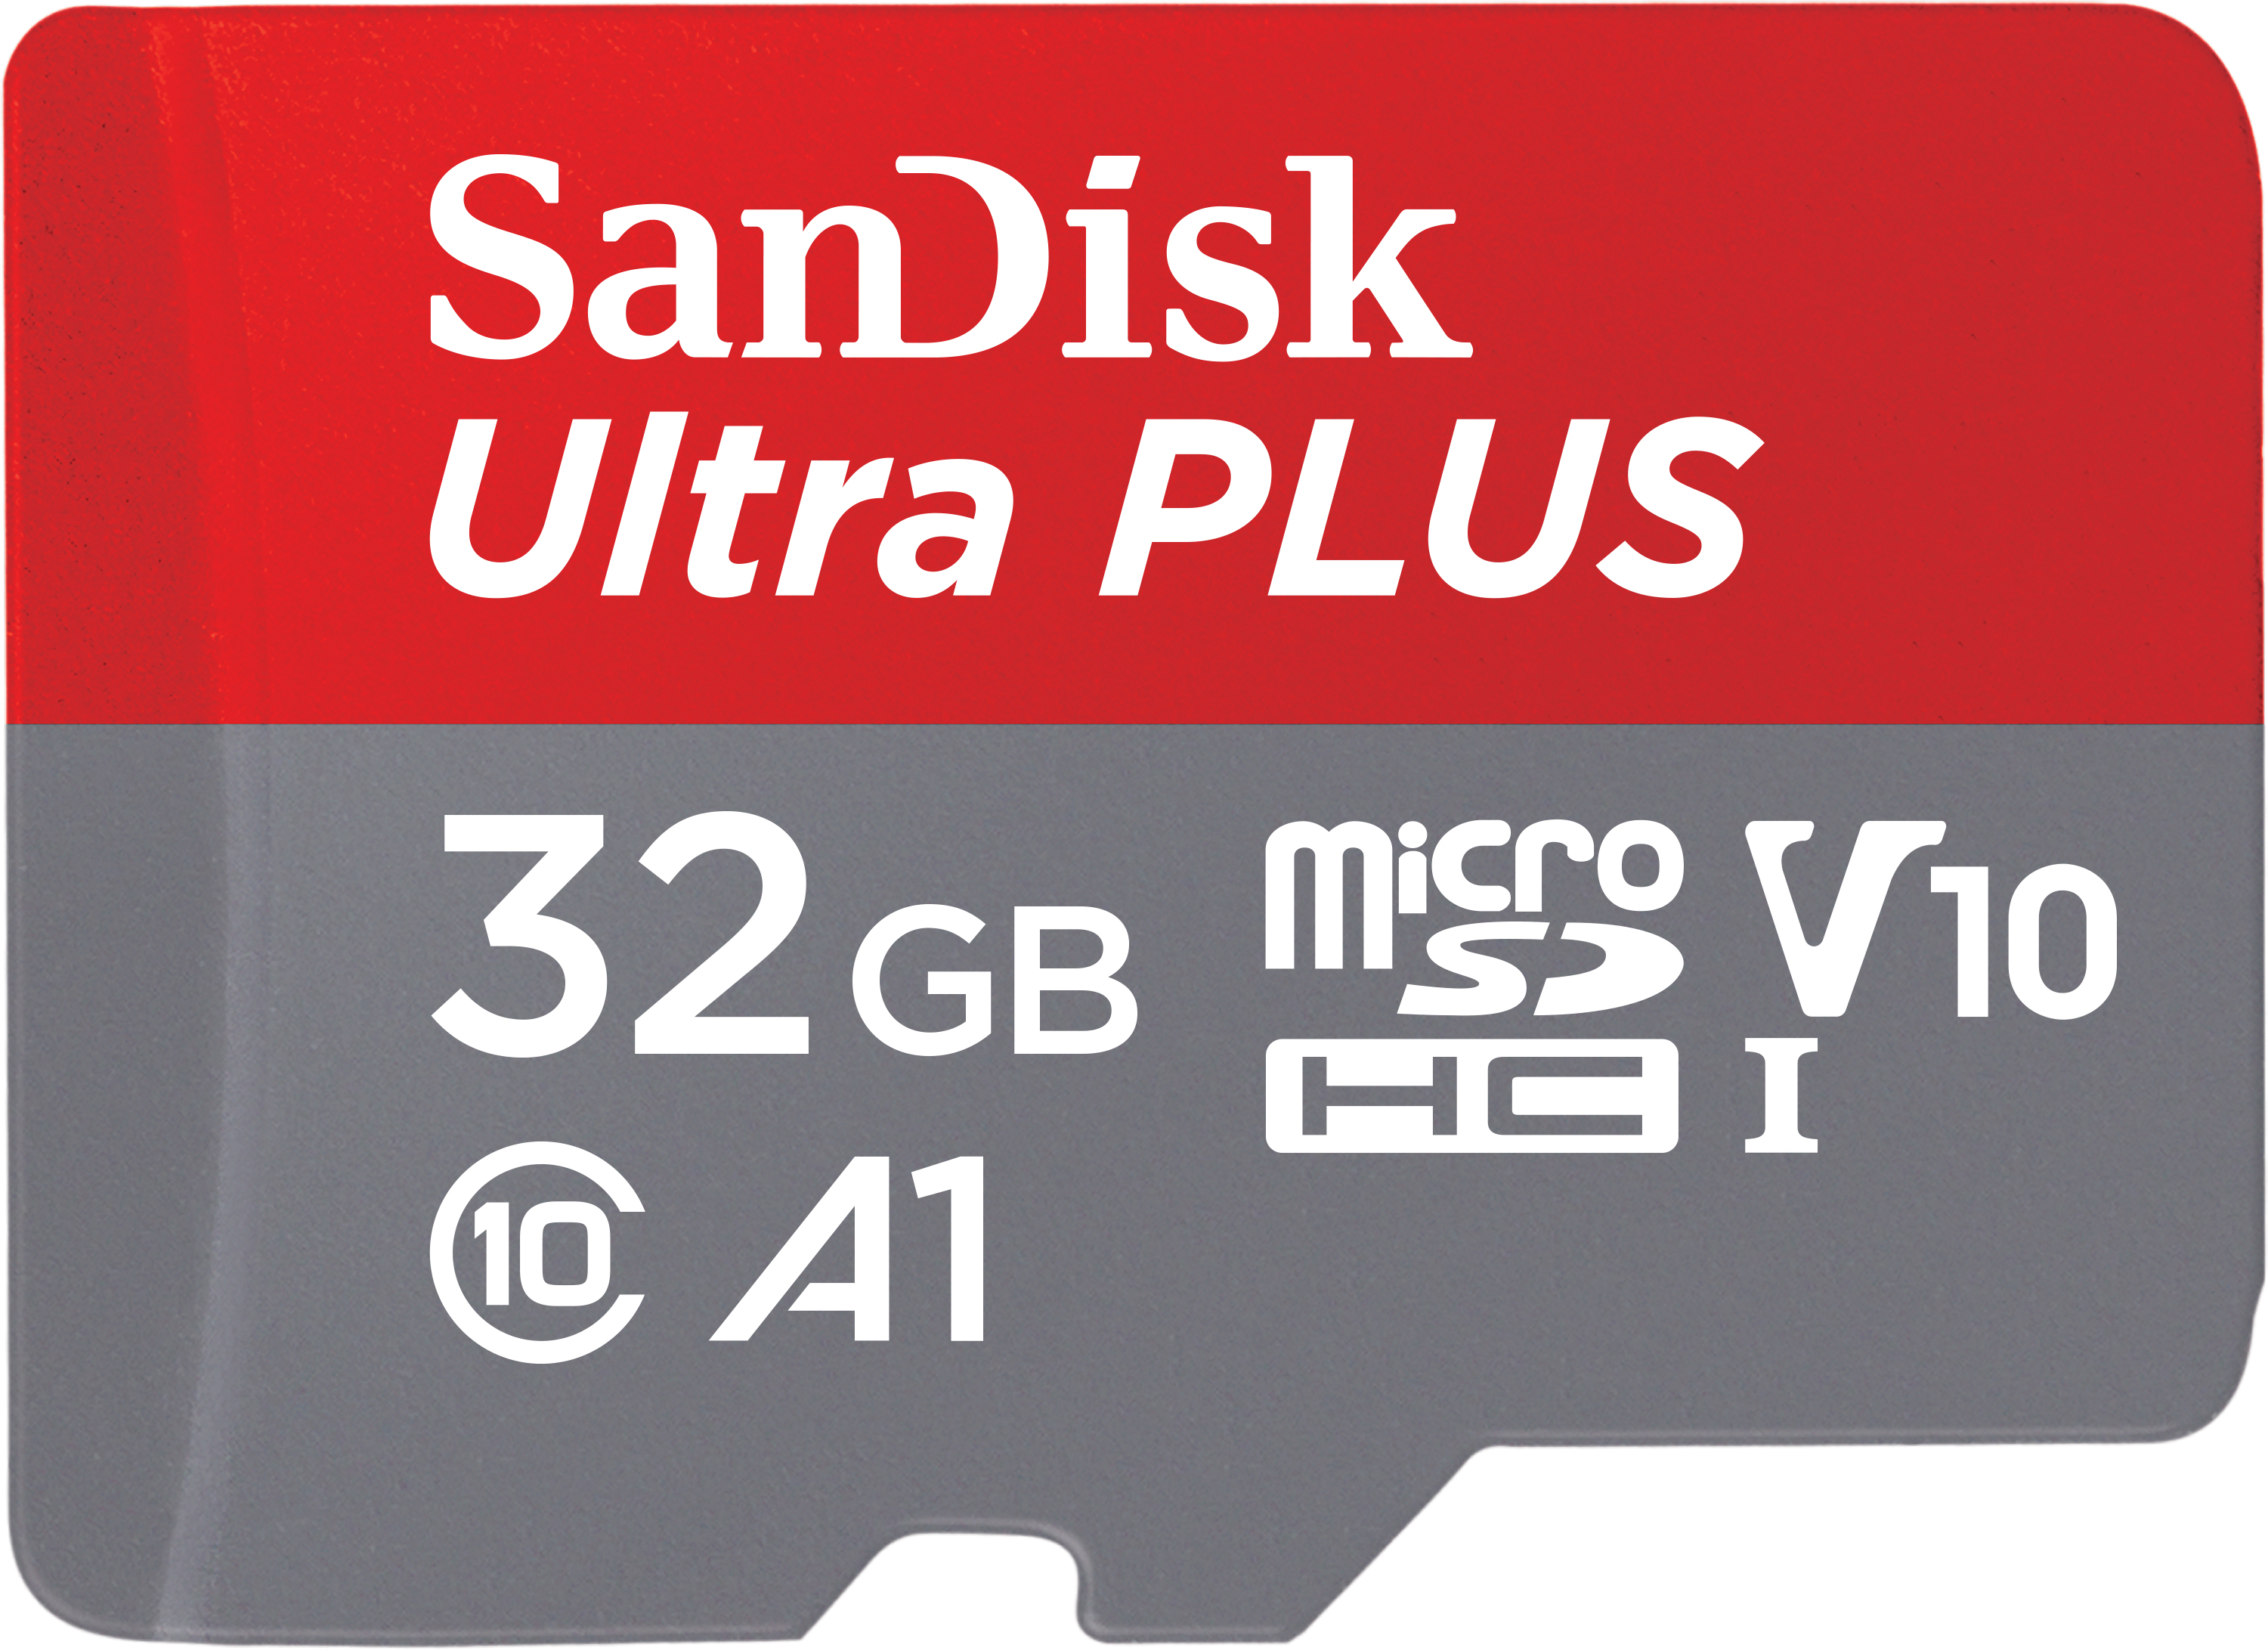 SanDisk Ultra® Plus MicroSDHC™ UHS-I Card, 32GB with Adapter - image 4 of 5